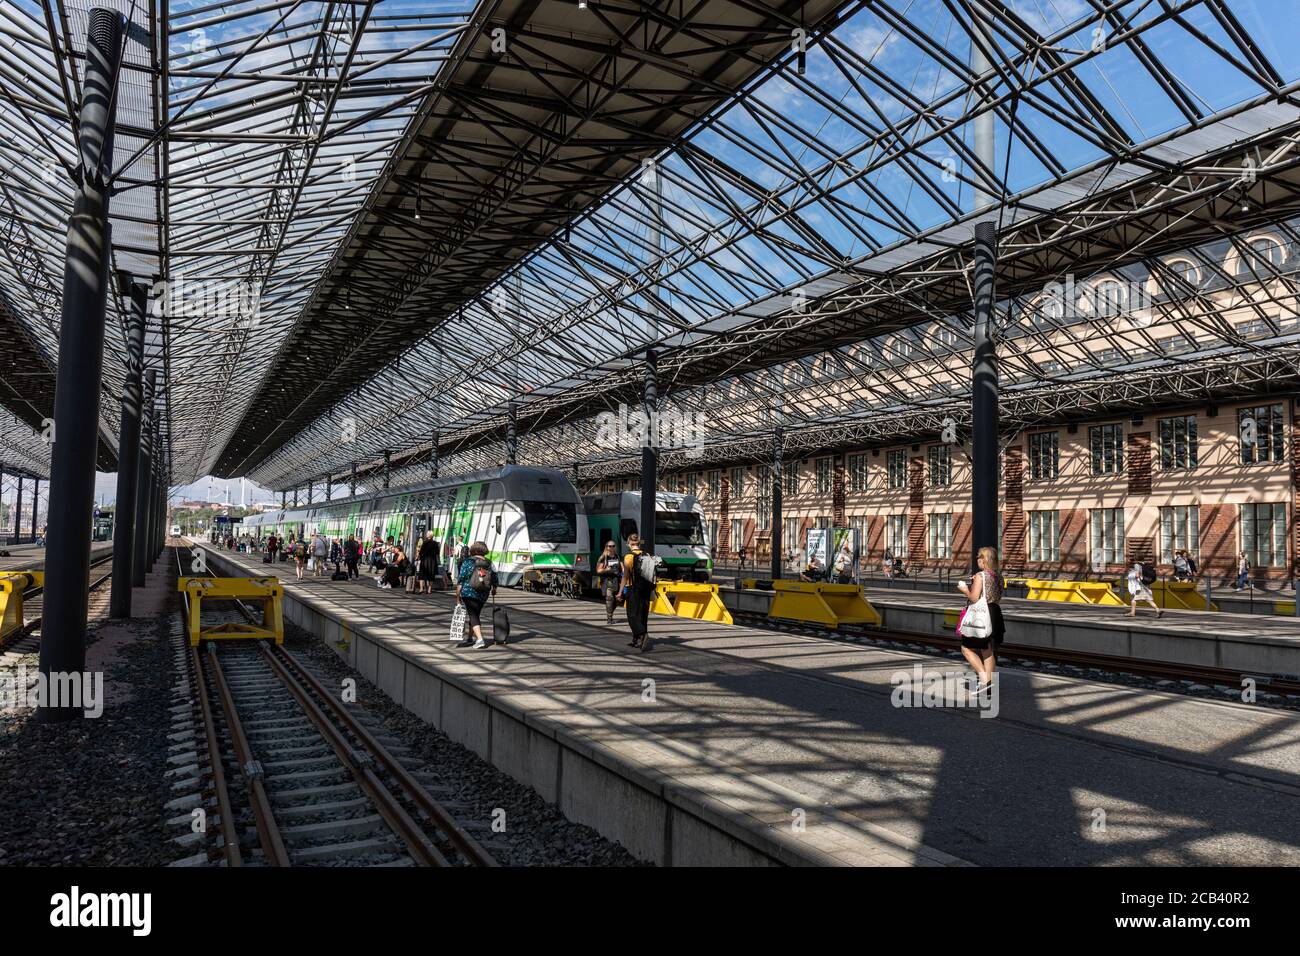 Rails, platforms, trains and glass ceiling at Central Railway Station in Helsinki, Finland Stock Photo